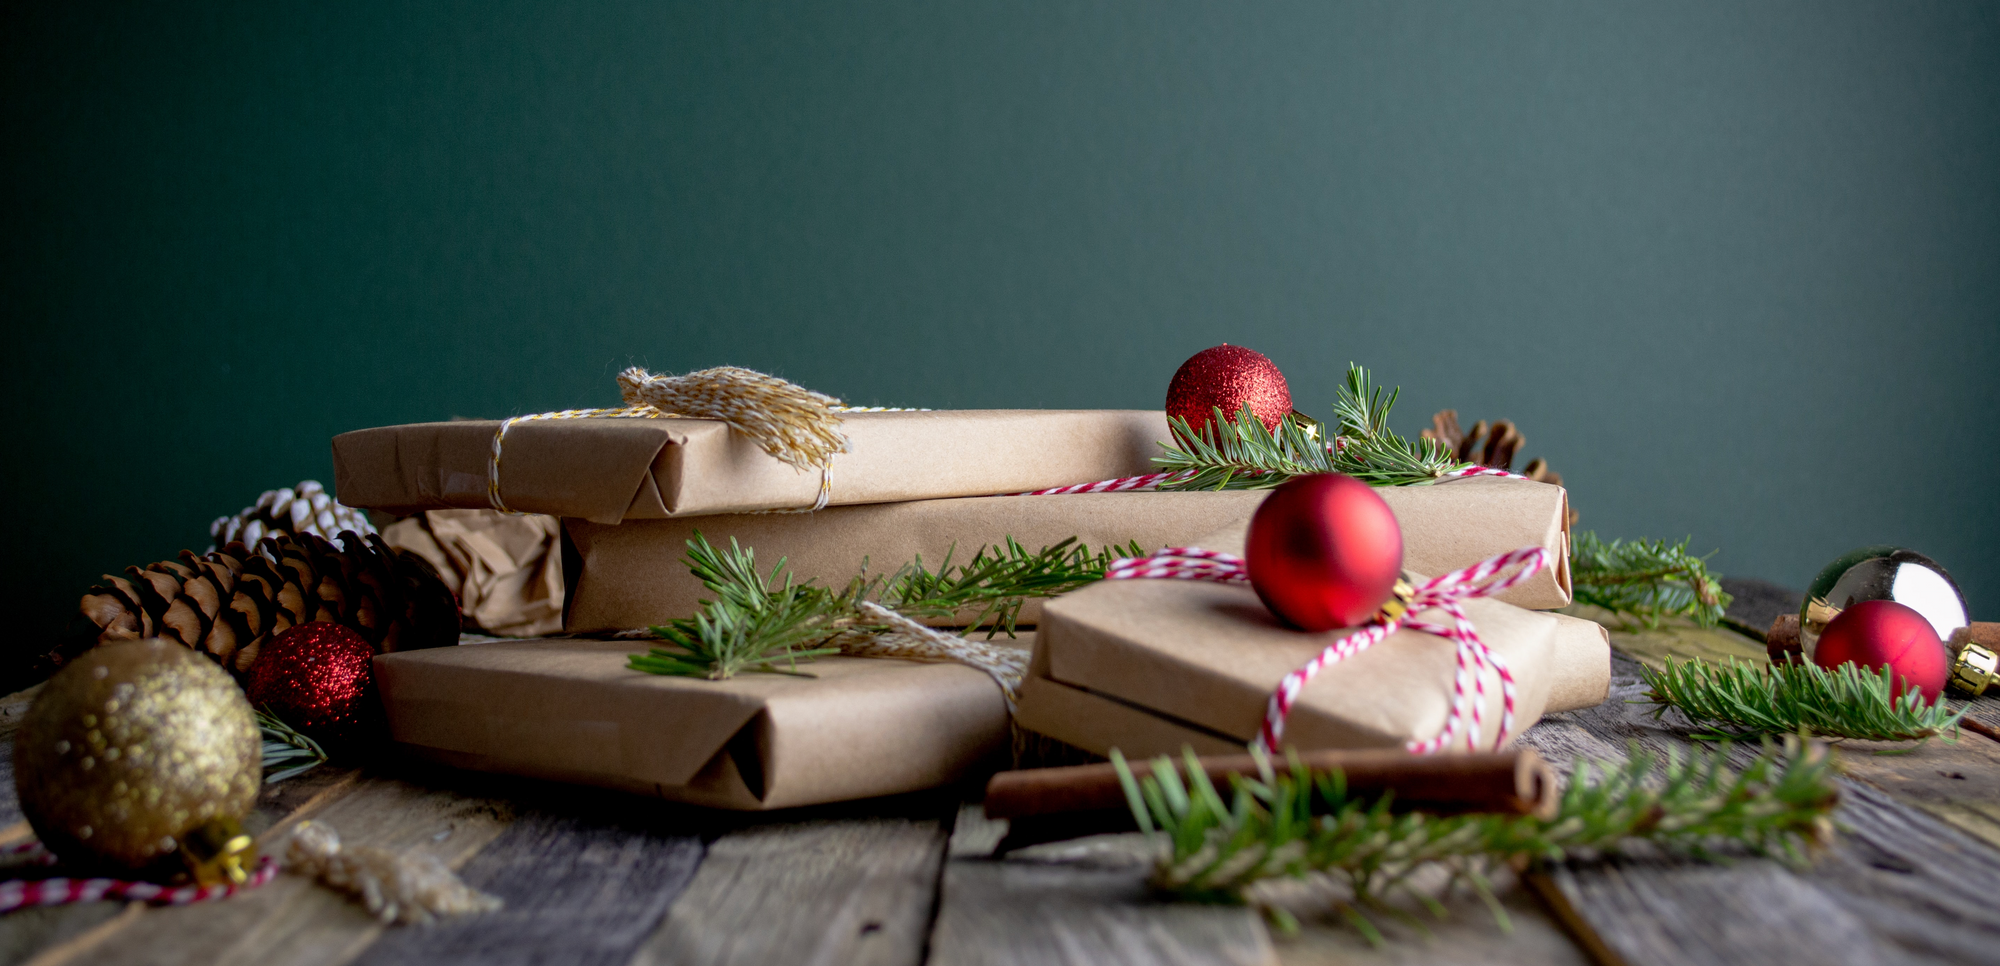 Our Sustainable Holiday Gift Guide